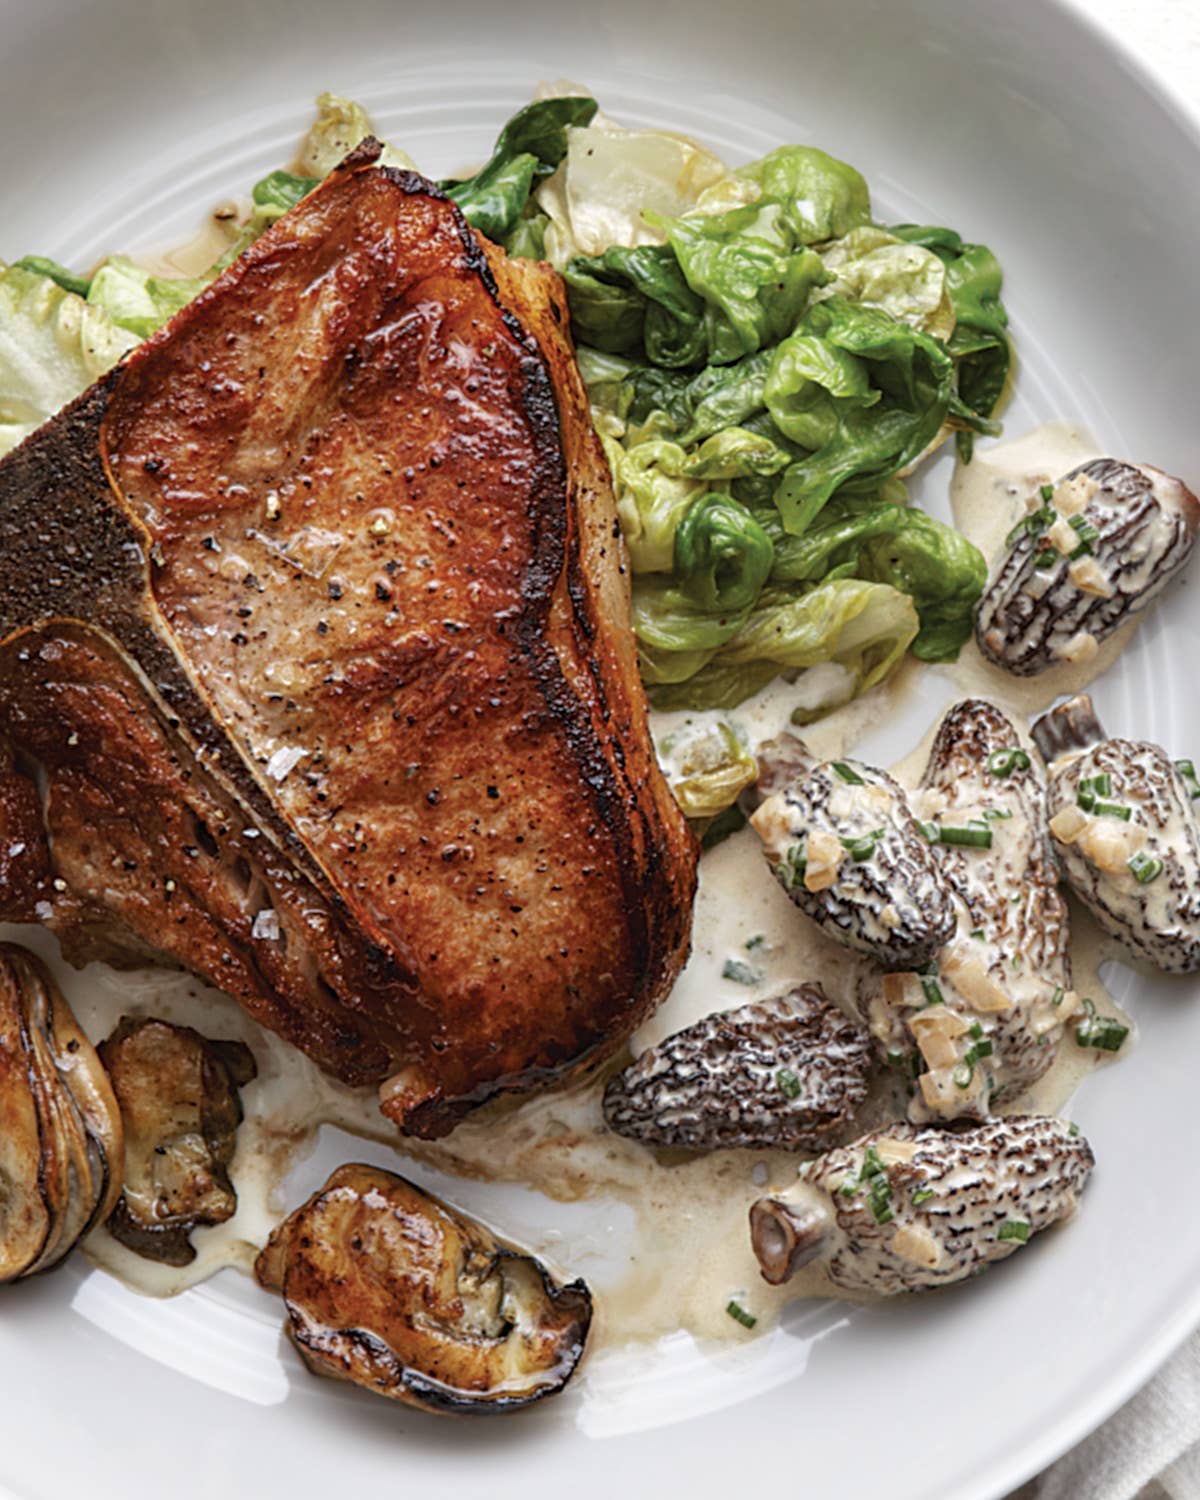 Veal Chops with Morels, Wilted Lettuce, Oysters, and Garlic-Parmesan Sauce